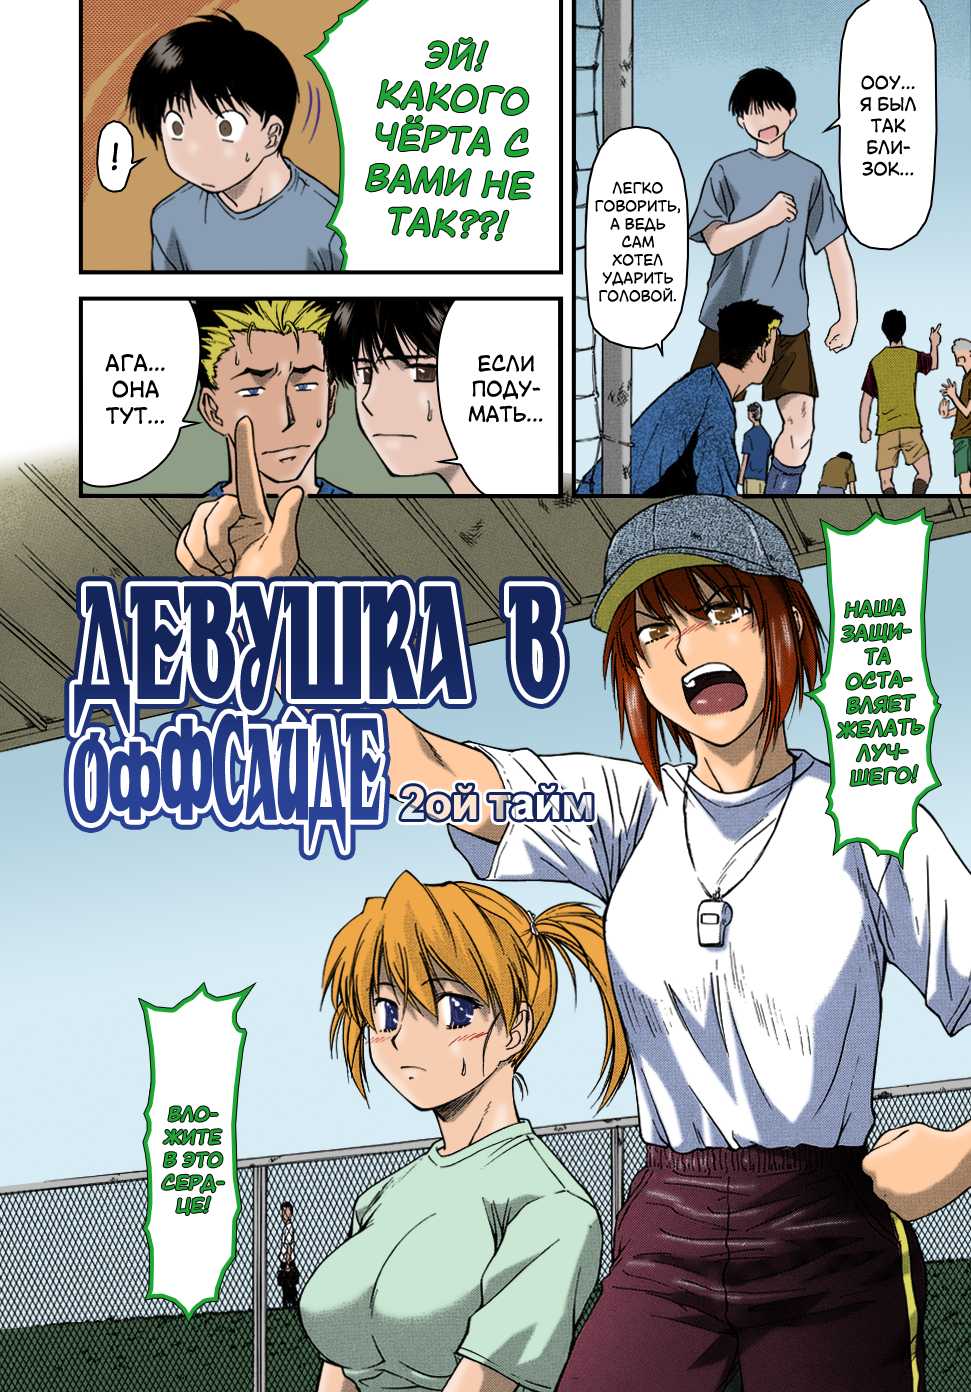 [Nagare Ippon] Offside Girl Ch. 1-5 [Russian] [Colorized] [Decensored] [WIP] - Page 35